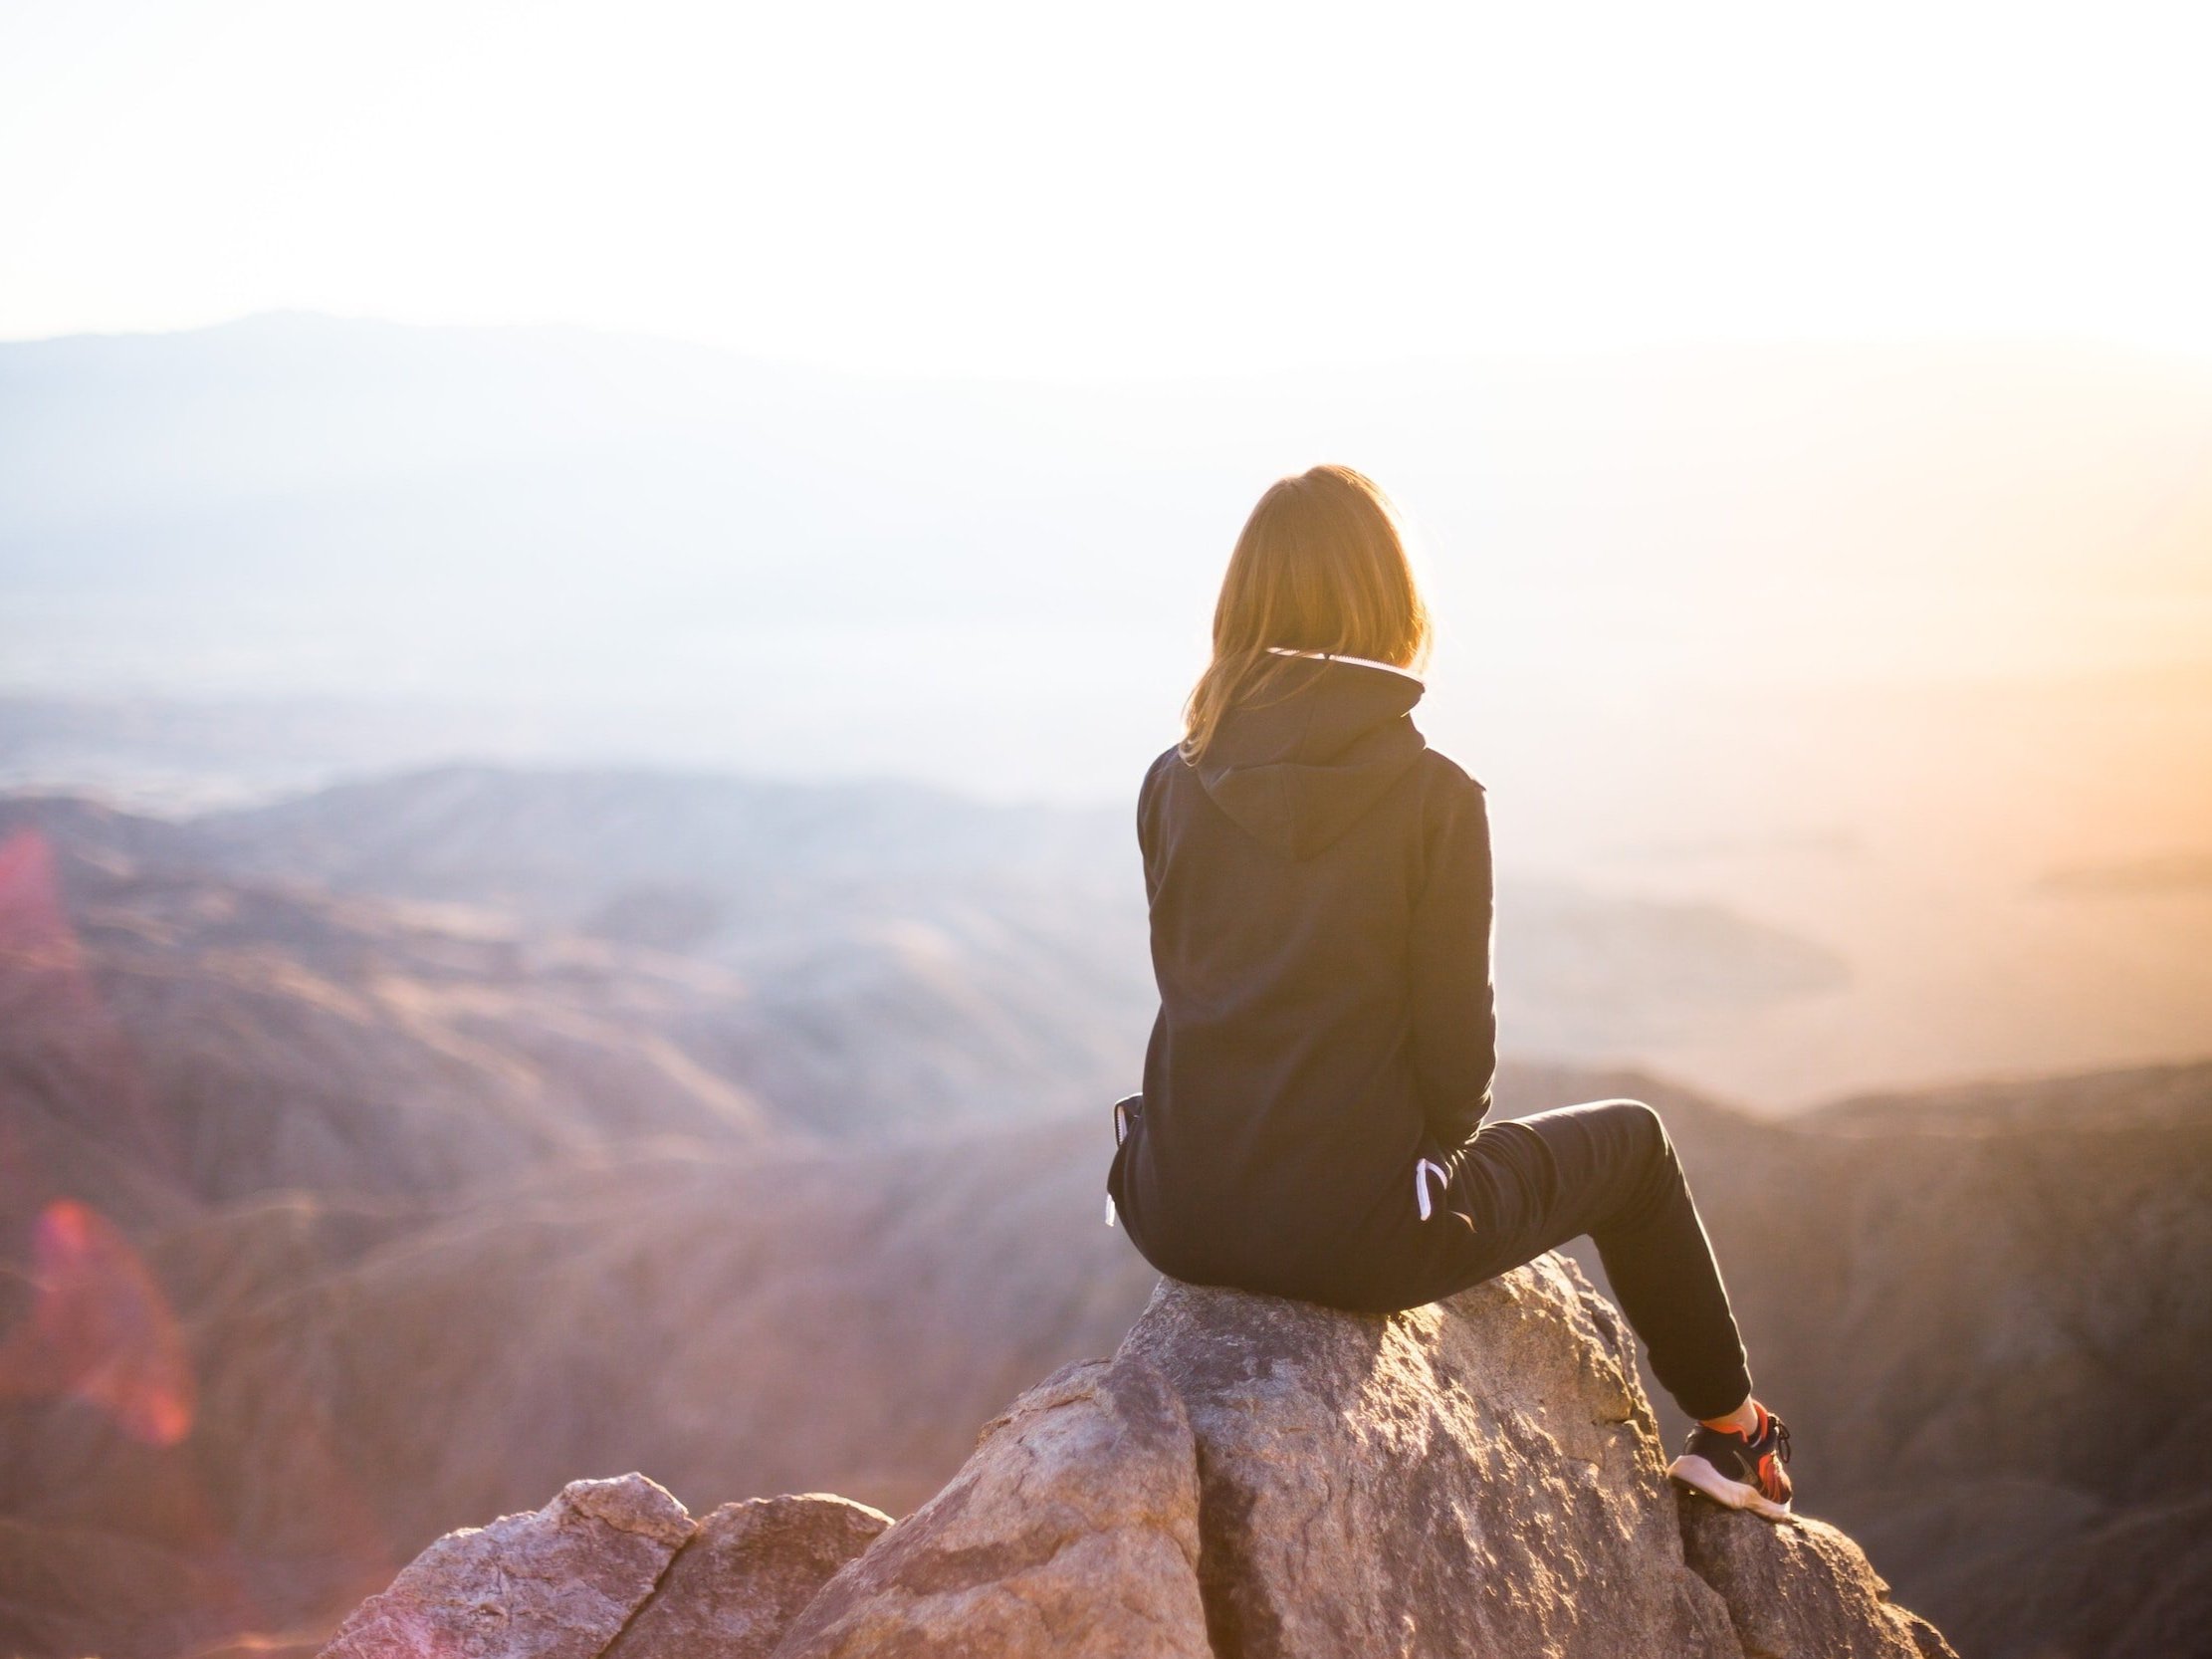 A lady sits on a mountain top, taking in the breathtaking scenery.